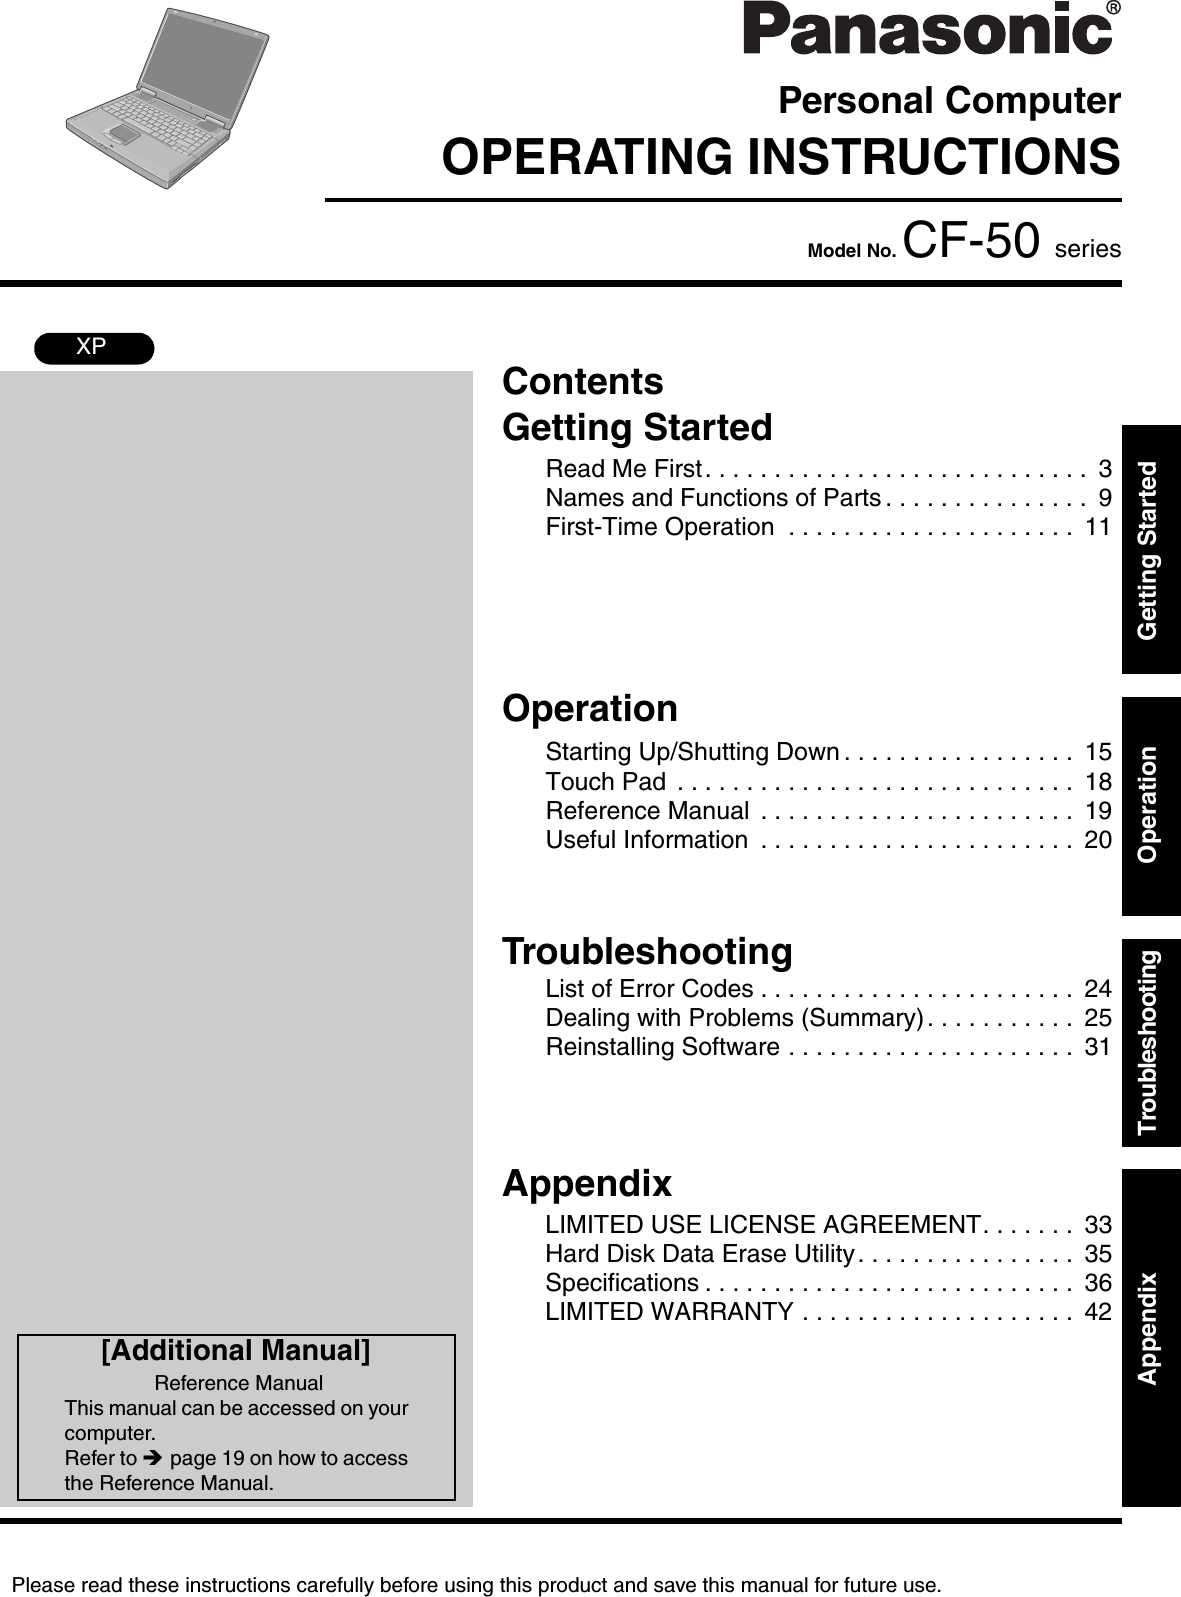 Please read these instructions carefully before using this product and save this manual for future use.ContentsGetting StartedOperationTroubleshootingGetting StartedOperationTroubleshootingAppendixAppendixPersonal ComputerOPERATING INSTRUCTIONSModel No. CF-50 seriesXP[Additional Manual]Reference ManualThis manual can be accessed on your computer.Refer to Îpage 19 on how to access the Reference Manual.Read Me First. . . . . . . . . . . . . . . . . . . . . . . . . . . .  3Names and Functions of Parts . . . . . . . . . . . . . . .  9First-Time Operation  . . . . . . . . . . . . . . . . . . . . .  11Starting Up/Shutting Down . . . . . . . . . . . . . . . . .  15Touch Pad  . . . . . . . . . . . . . . . . . . . . . . . . . . . . .  18Reference Manual  . . . . . . . . . . . . . . . . . . . . . . .  19Useful Information  . . . . . . . . . . . . . . . . . . . . . . .  20List of Error Codes . . . . . . . . . . . . . . . . . . . . . . .  24Dealing with Problems (Summary). . . . . . . . . . .  25Reinstalling Software . . . . . . . . . . . . . . . . . . . . .  31LIMITED USE LICENSE AGREEMENT. . . . . . .  33Hard Disk Data Erase Utility. . . . . . . . . . . . . . . .  35Specifications . . . . . . . . . . . . . . . . . . . . . . . . . . .  36LIMITED WARRANTY . . . . . . . . . . . . . . . . . . . .  42